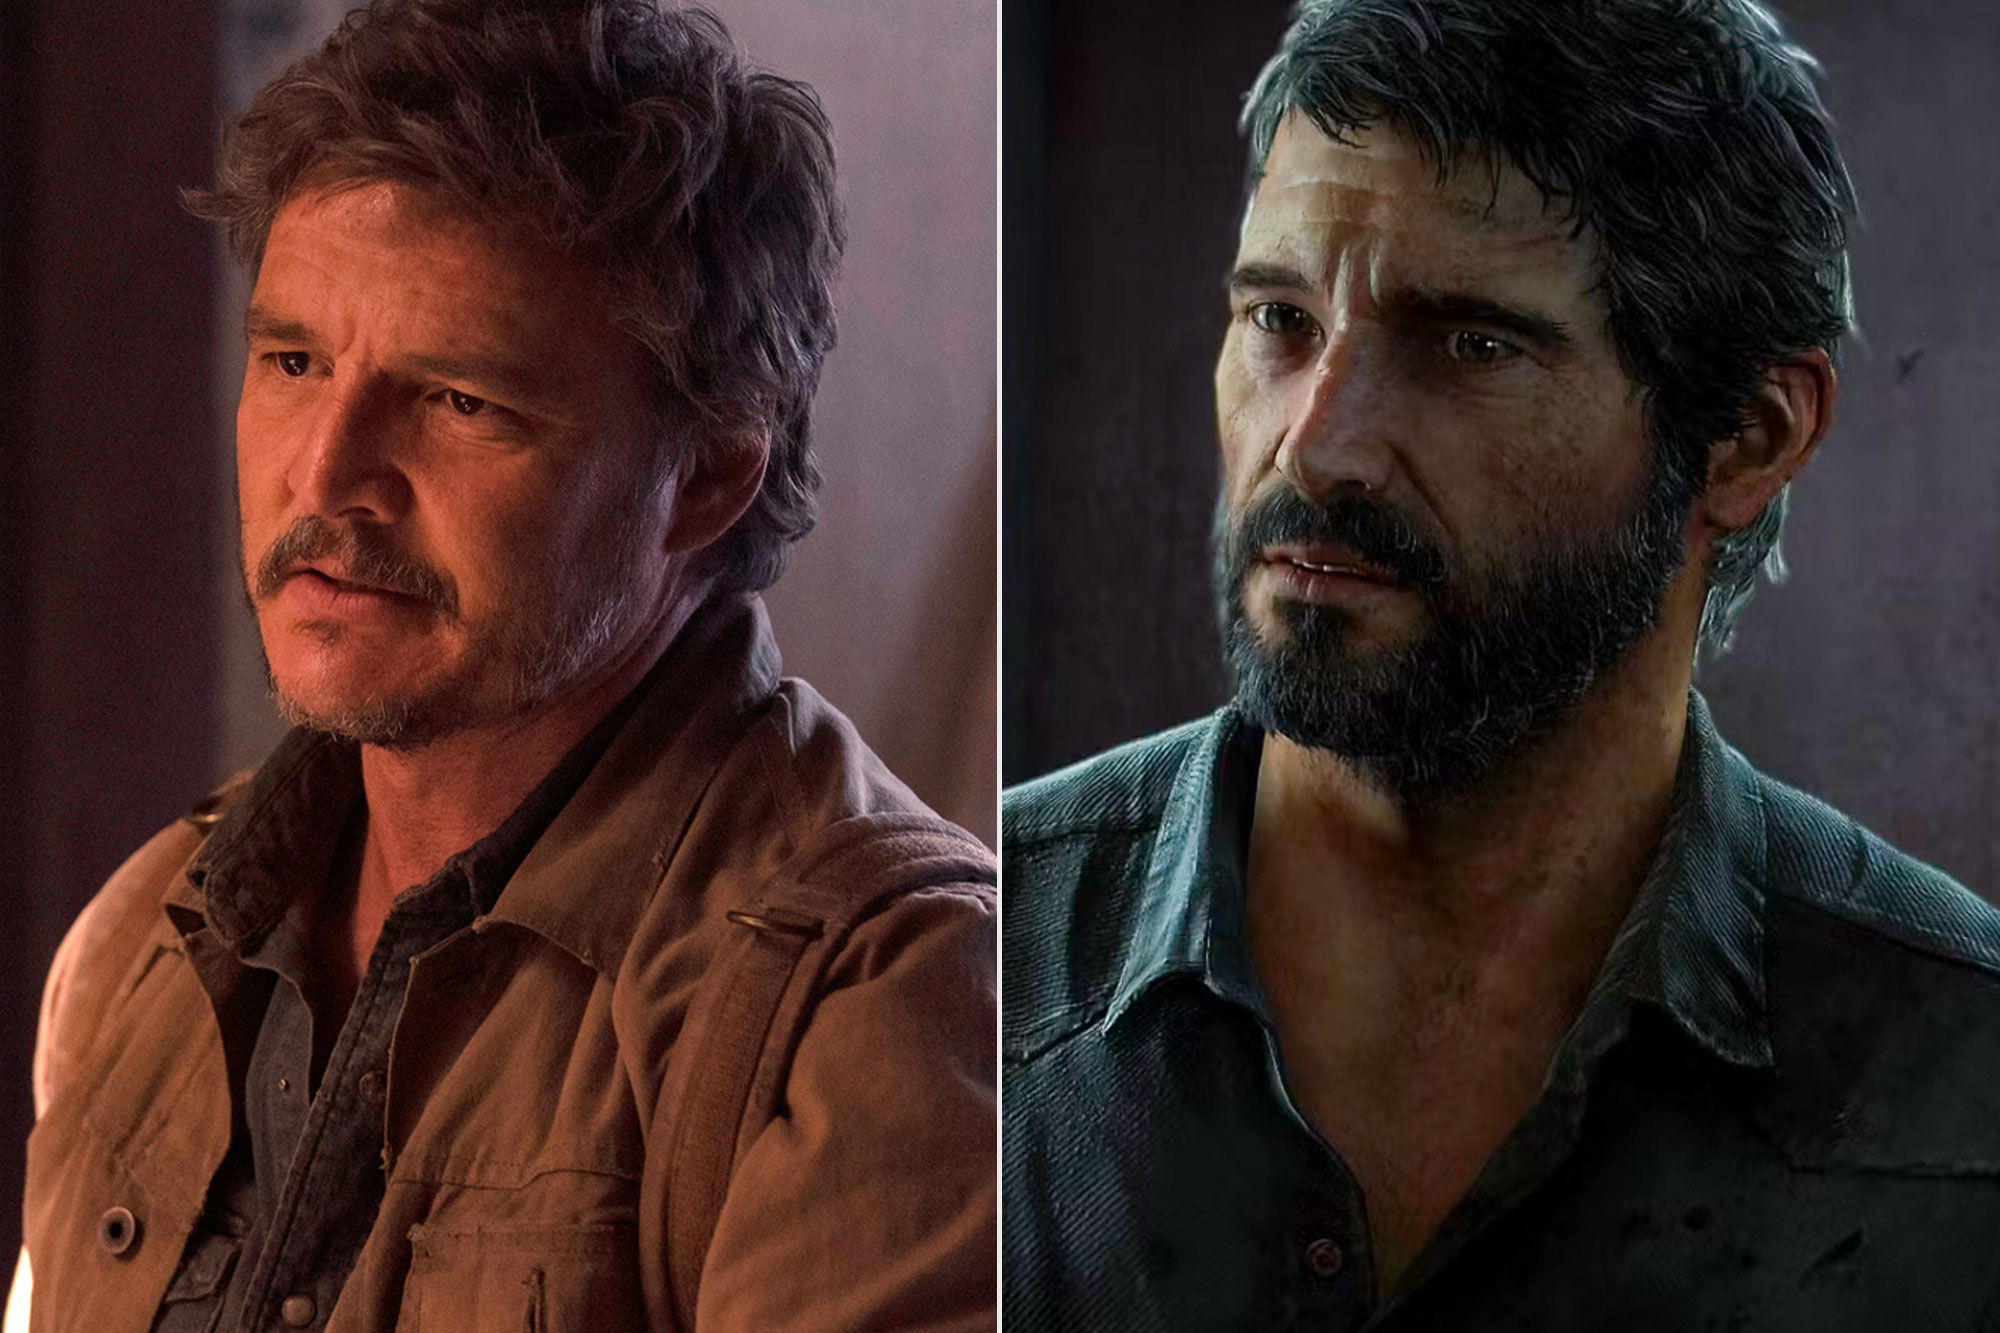 Pedro Pascal on 'The Last of Us'; 'The Last of Us' video game